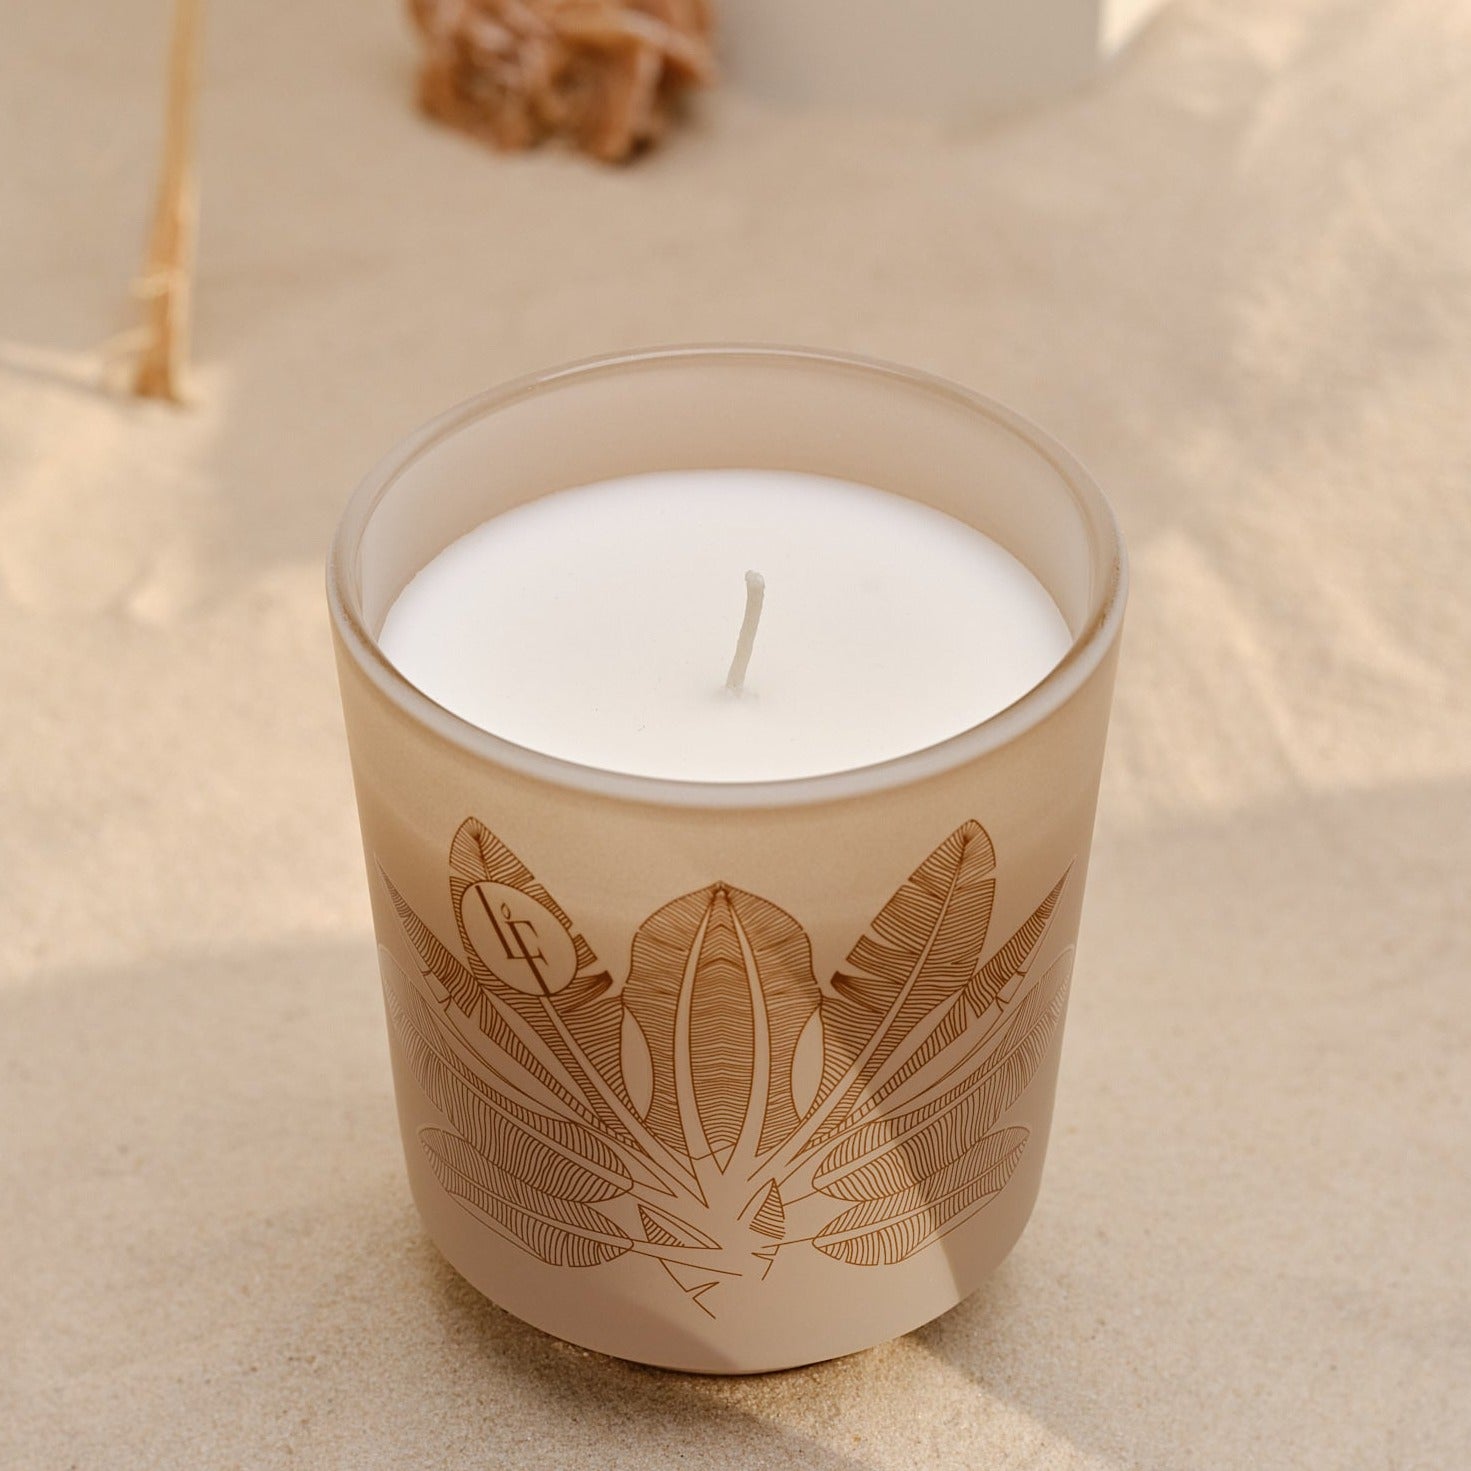 Billede af CLAY MUSK - LIGHTS FROM ELSEWHERE - DUFTLYS - Scented Candle / Duftlys - Bougies la Francaise - BLF - StudioBuus